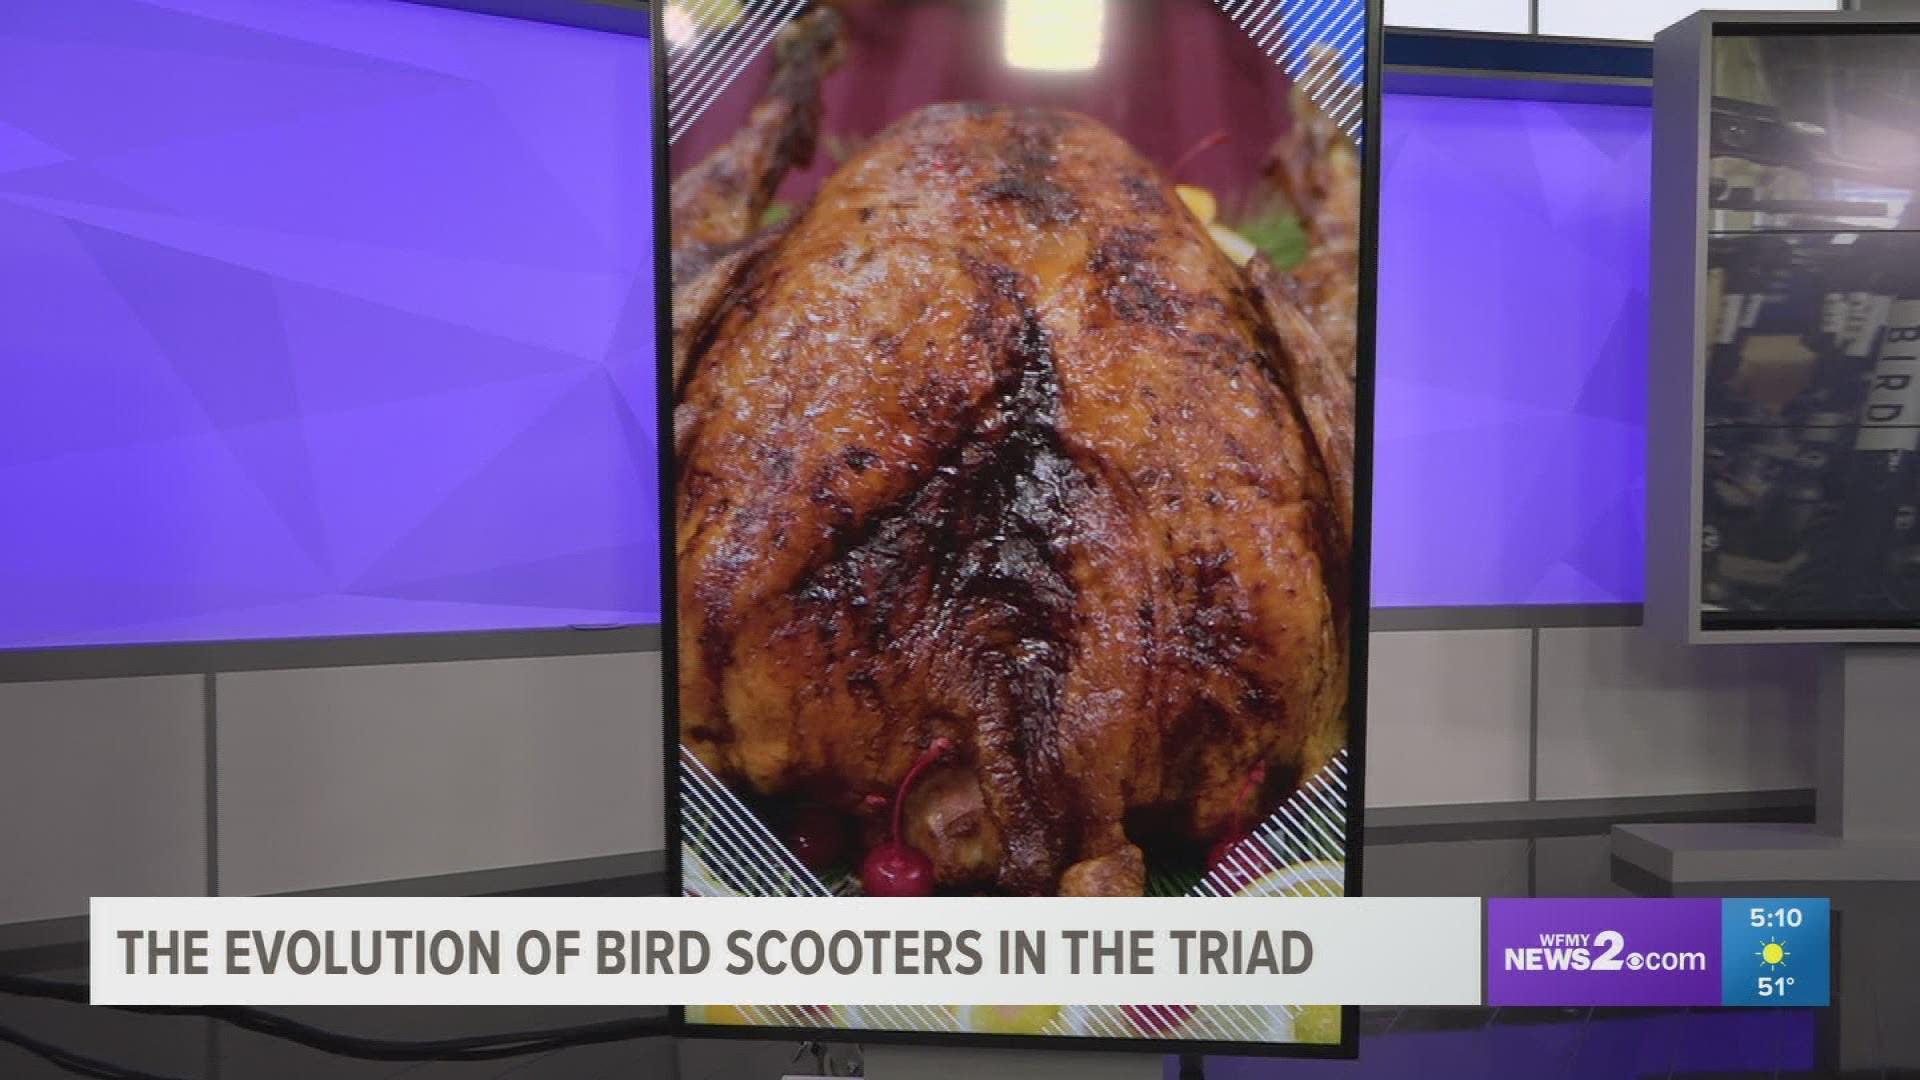 Turkeys aren't the only birds in the hot seat this month. Bird scooters have made quite the name for themselves in the Triad.